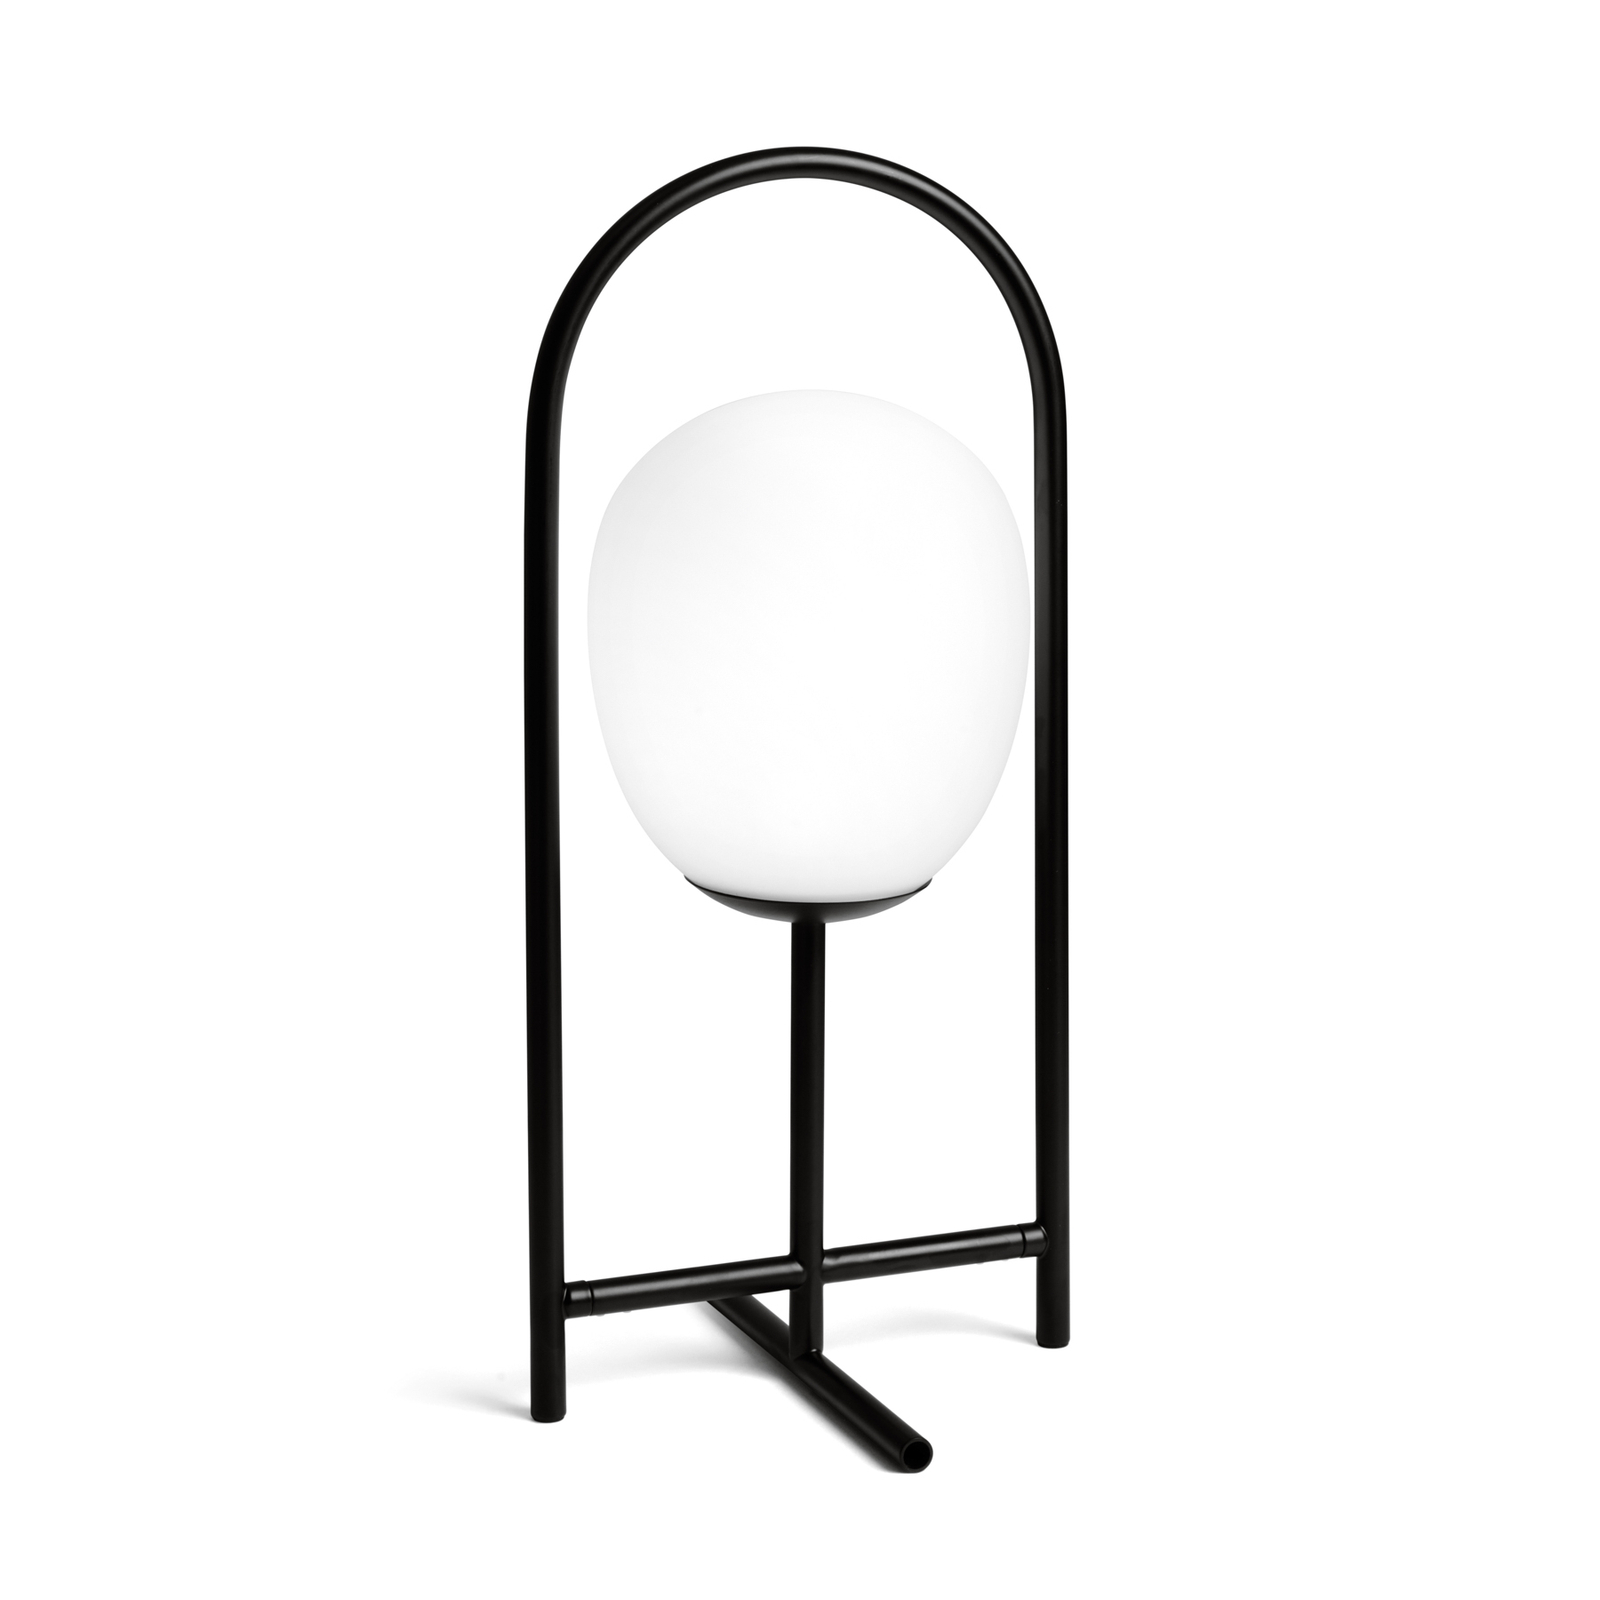 Drop table lamp, frosted glass, black frame